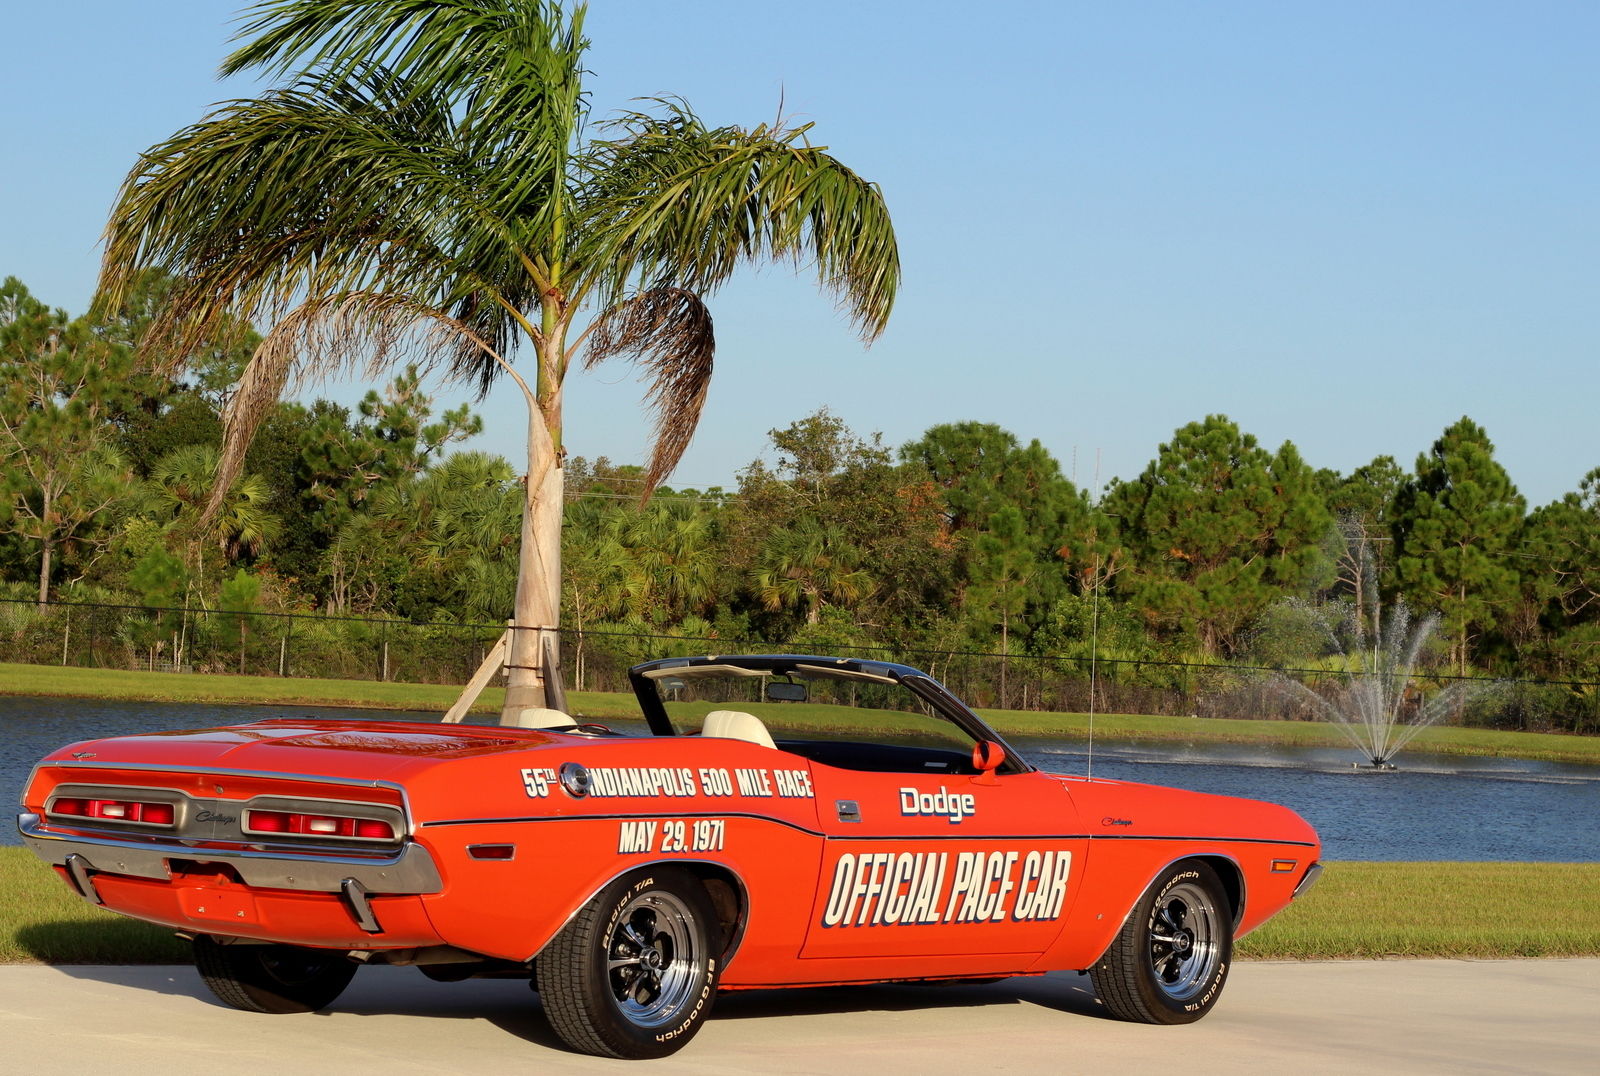 Would You Want To Own A 1971 Dodge Challenger Pace Car Edition, Knowing Why It’s So Famous?